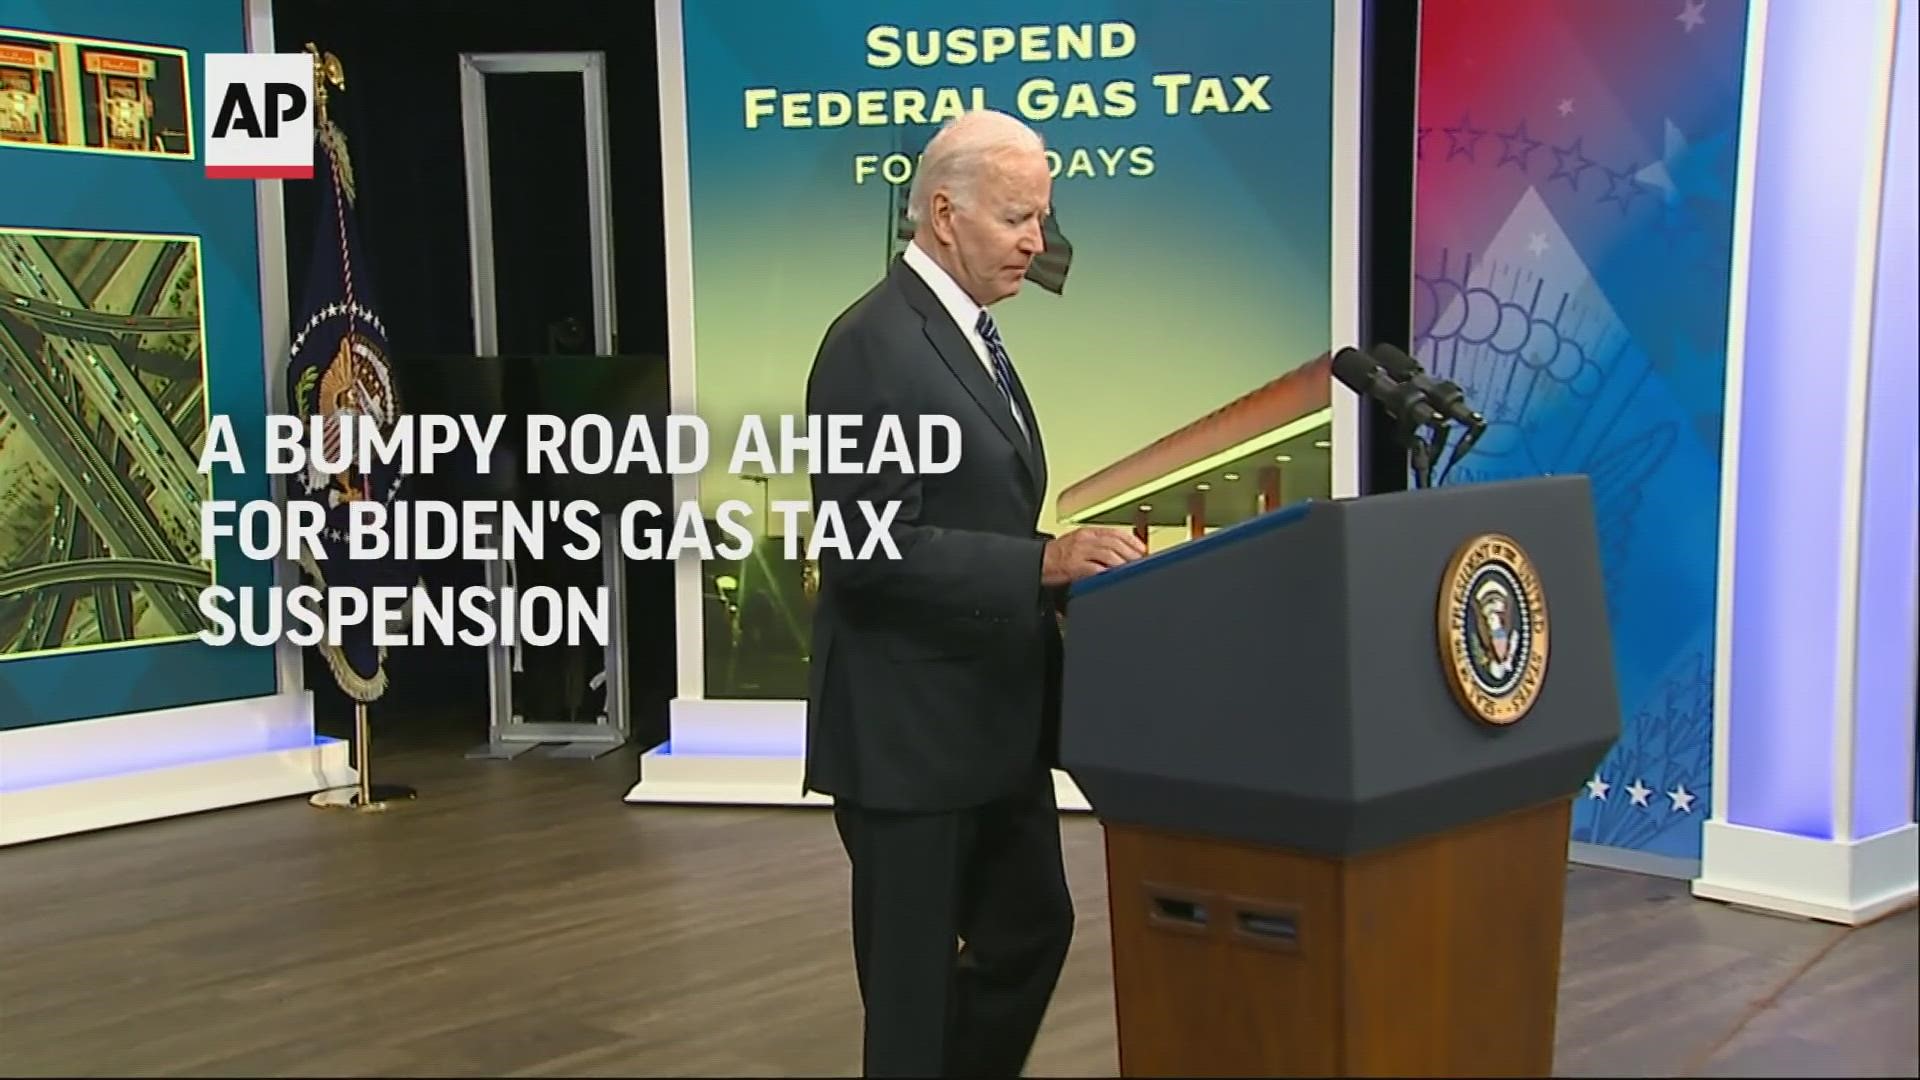 WATCH: Biden is urging Congress to suspend federal gasoline and diesel taxes for 3 months, but lawmakers have expressed skepticism.